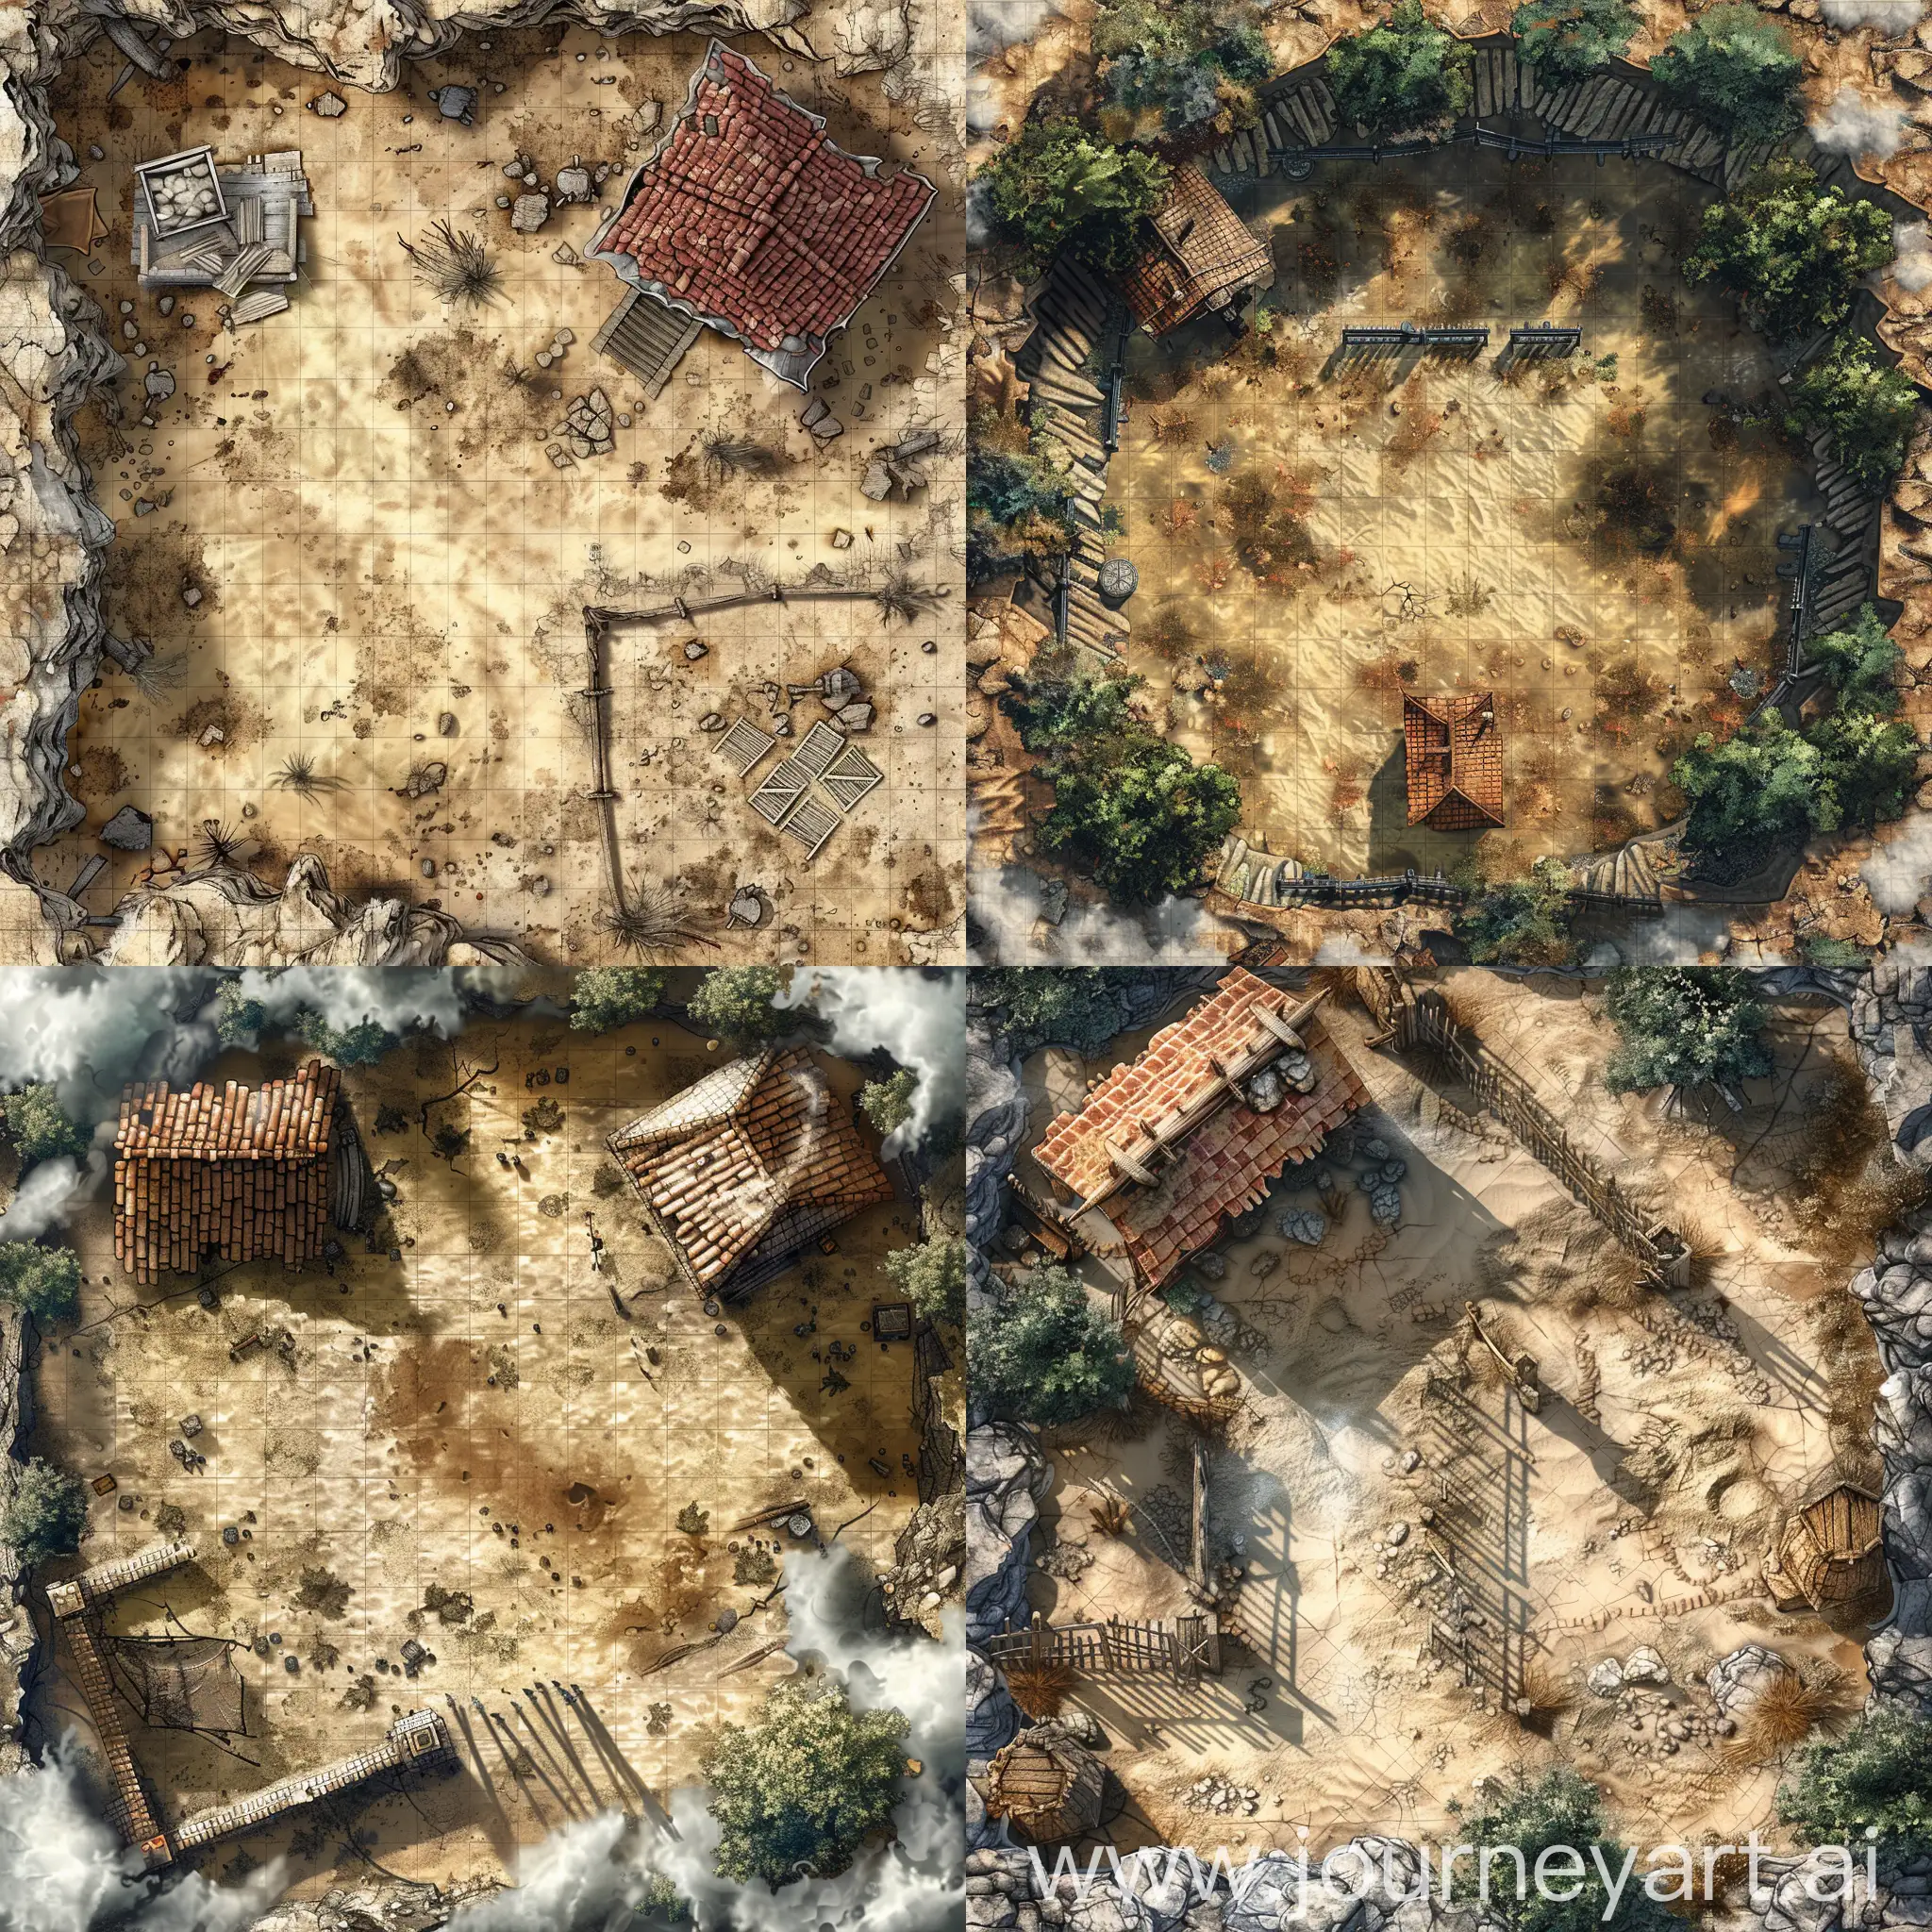 2D sky's view centered VTT battlemap represting a small guard control point in hell, with a hut and an adjacent fenced fight pit with a mix of sand and stone ground.